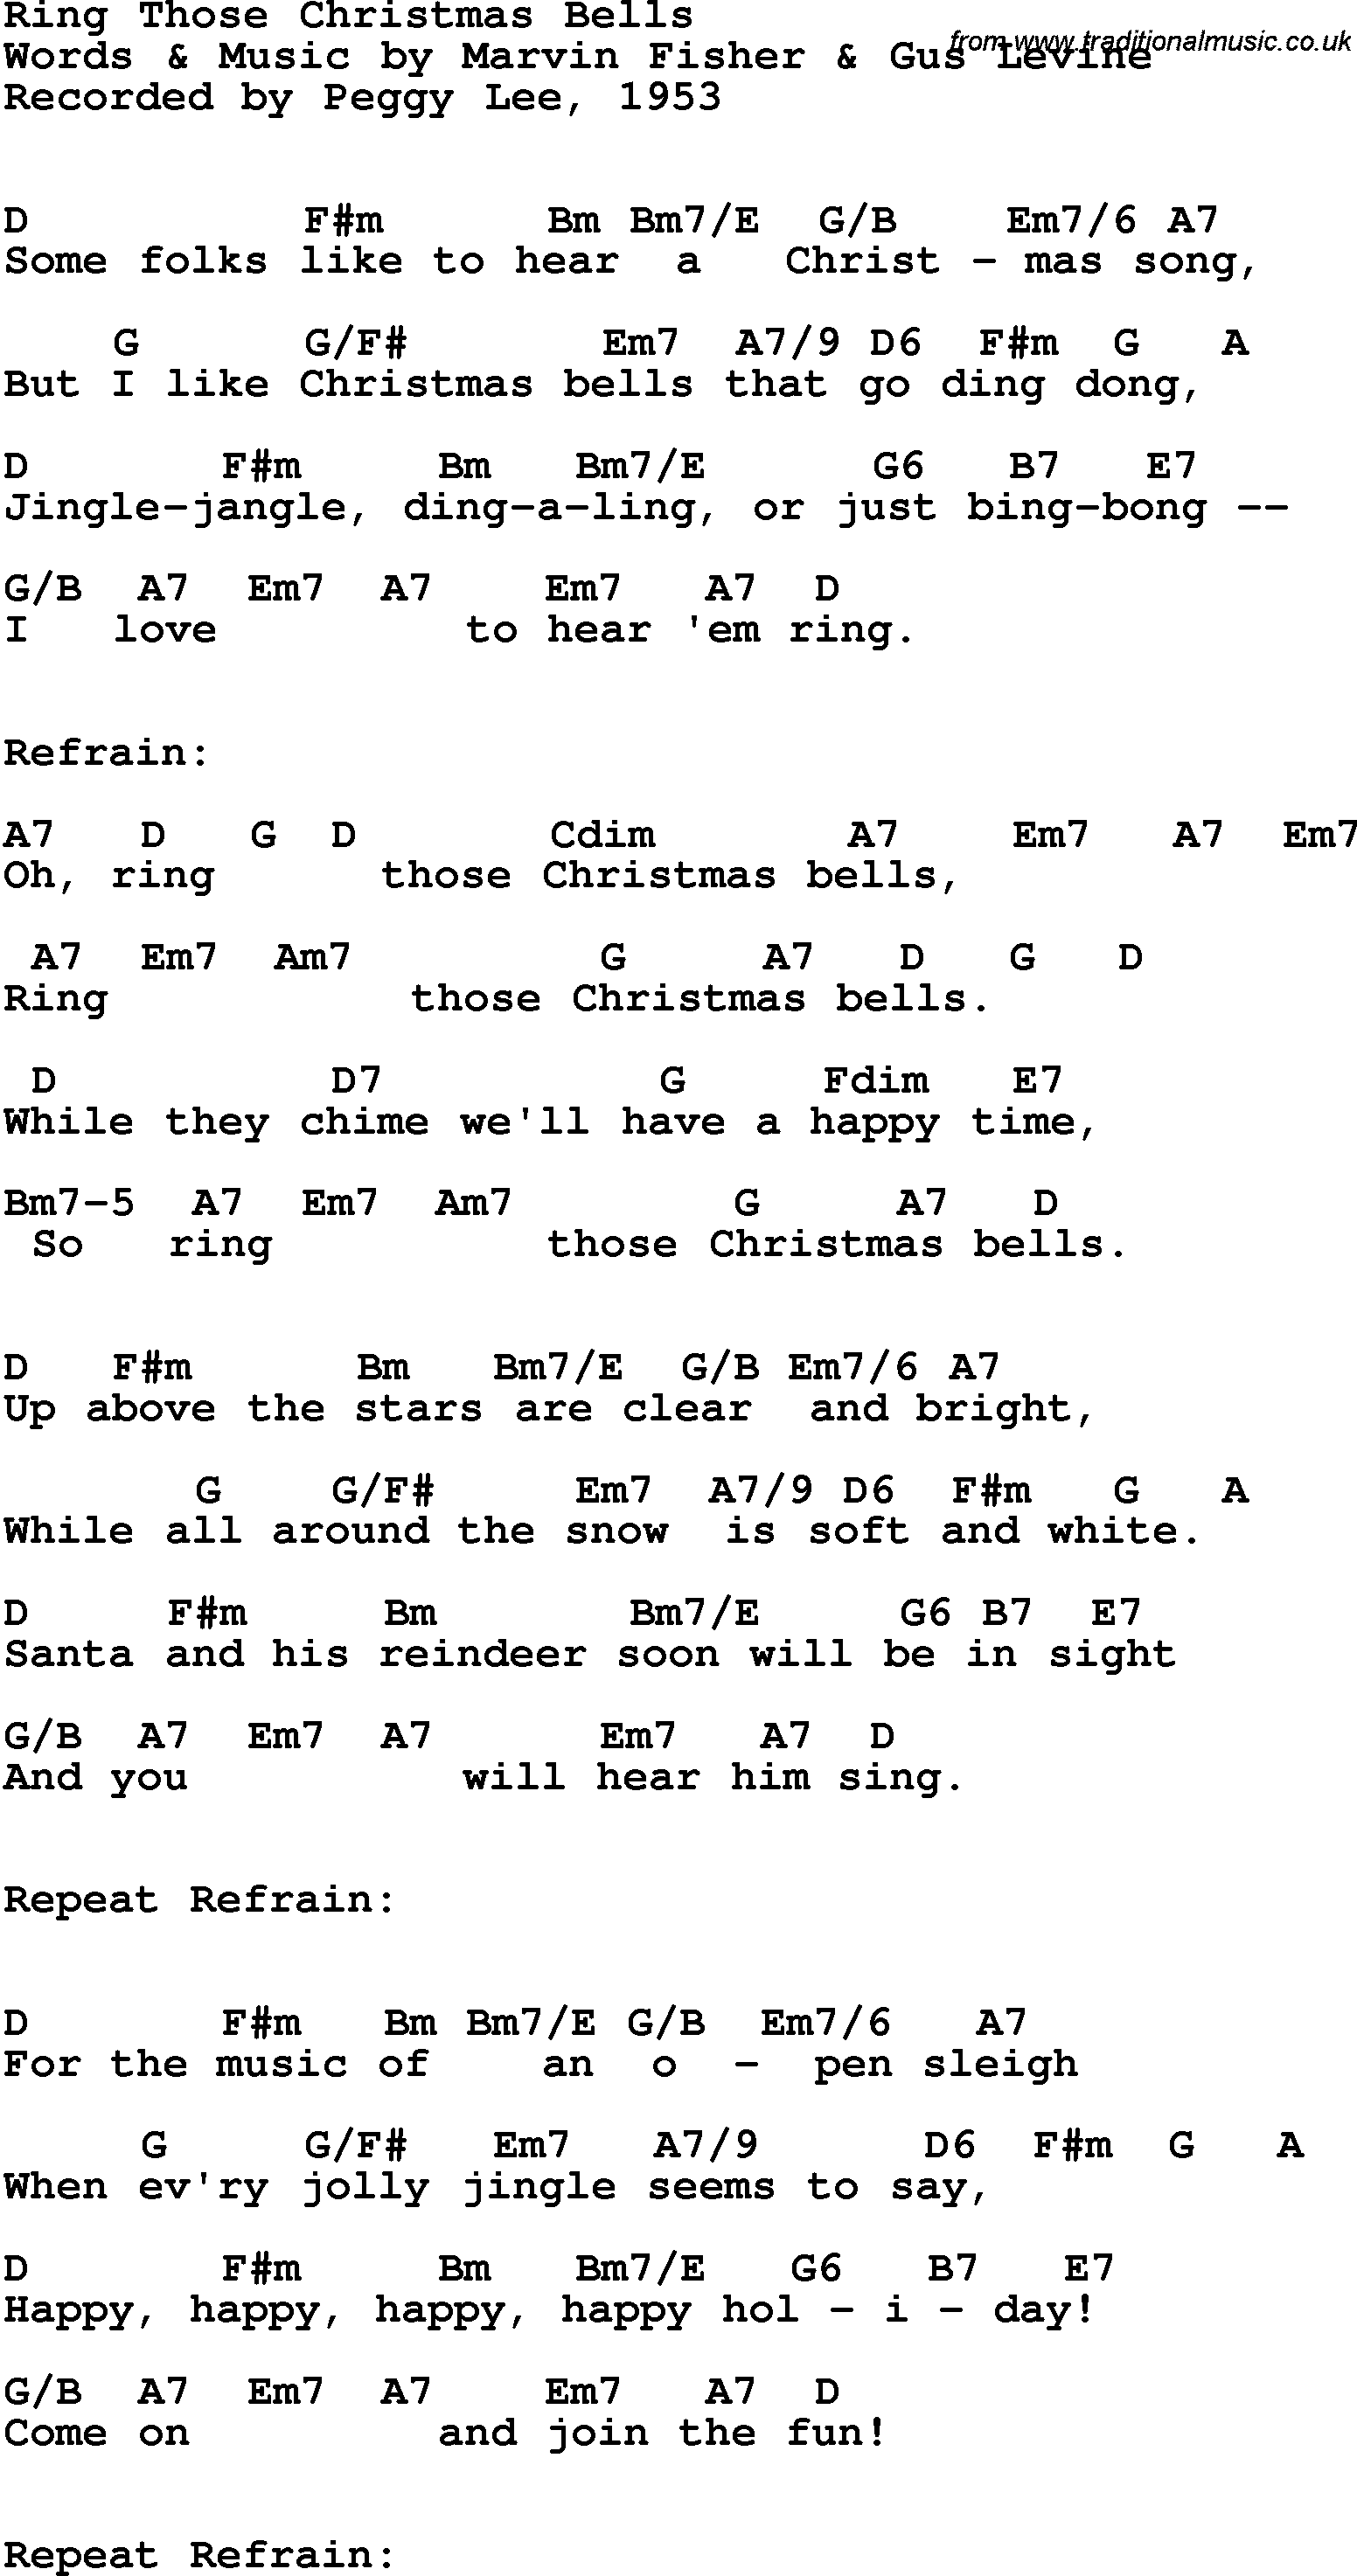 Song Lyrics with guitar chords for Ring Those Christmas Bells - Peggy Lee, 1953